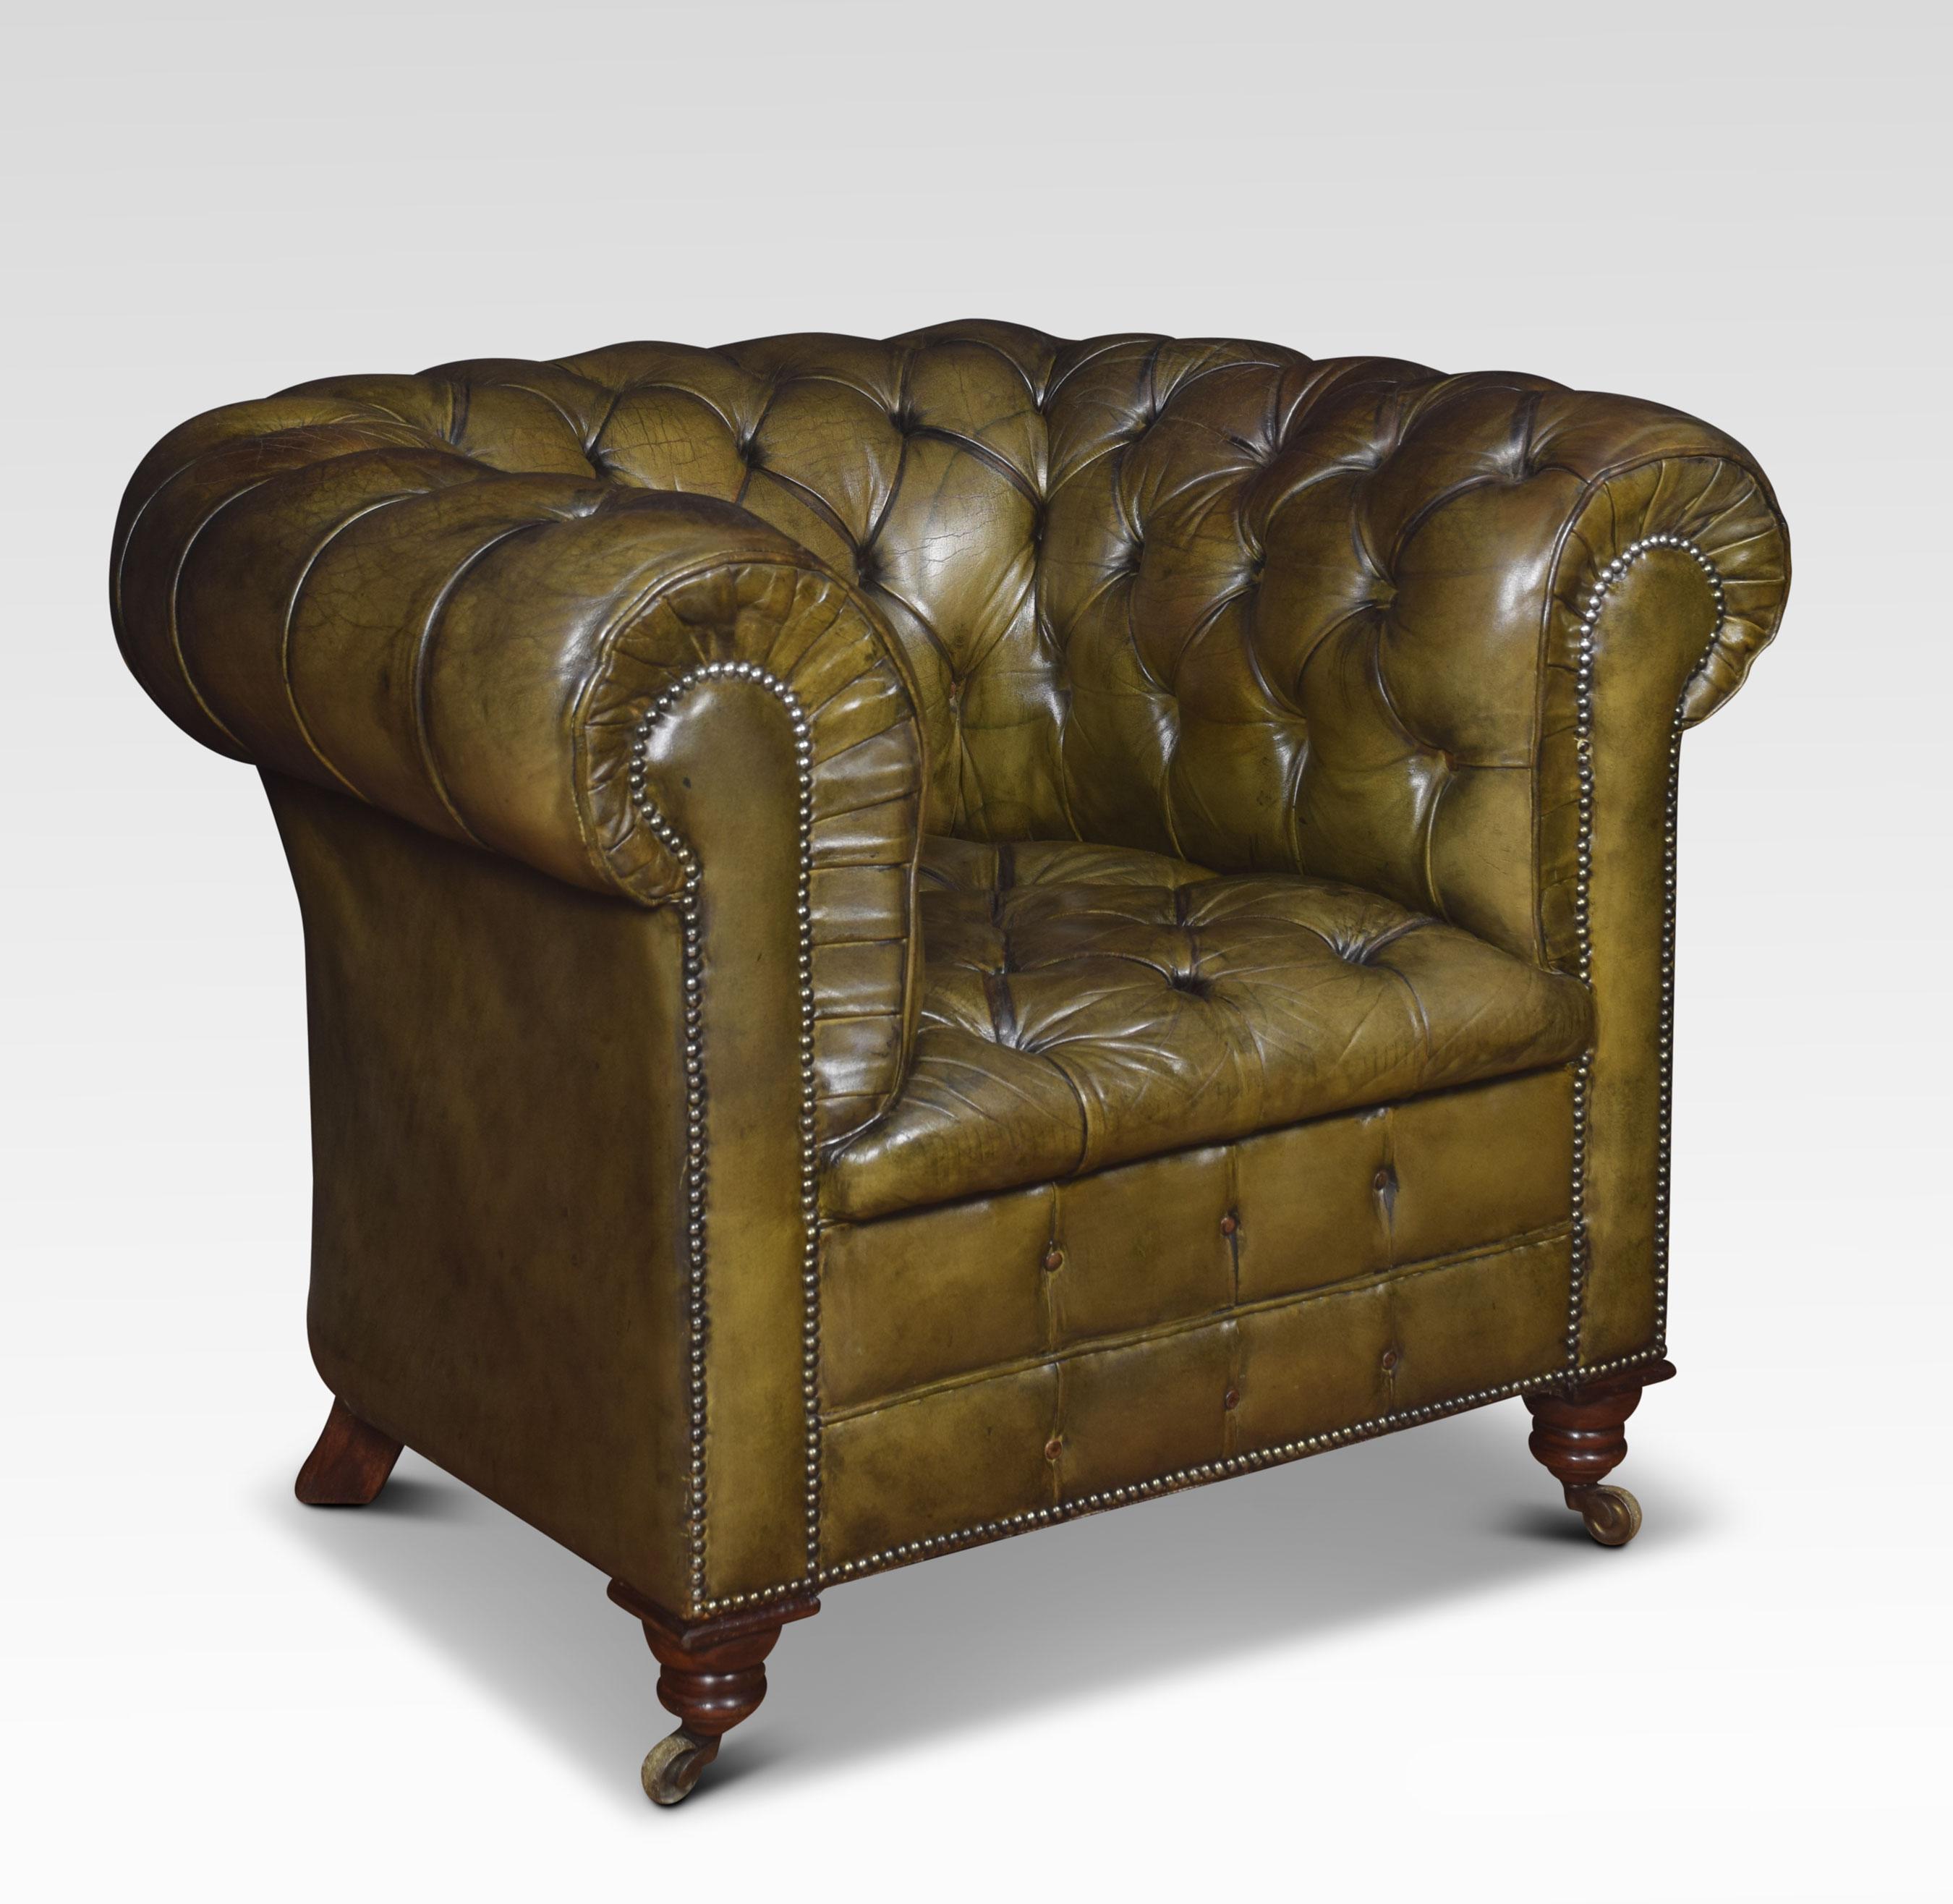 Leather Chesterfield club chair, having deep buttoned back and seat, raised up on turned feet with brass castors. Good solid condition, the leather is soft, nicely worn in.
Dimensions:
Height 33 inches, height to seat 19.5 inches
Width 41.5